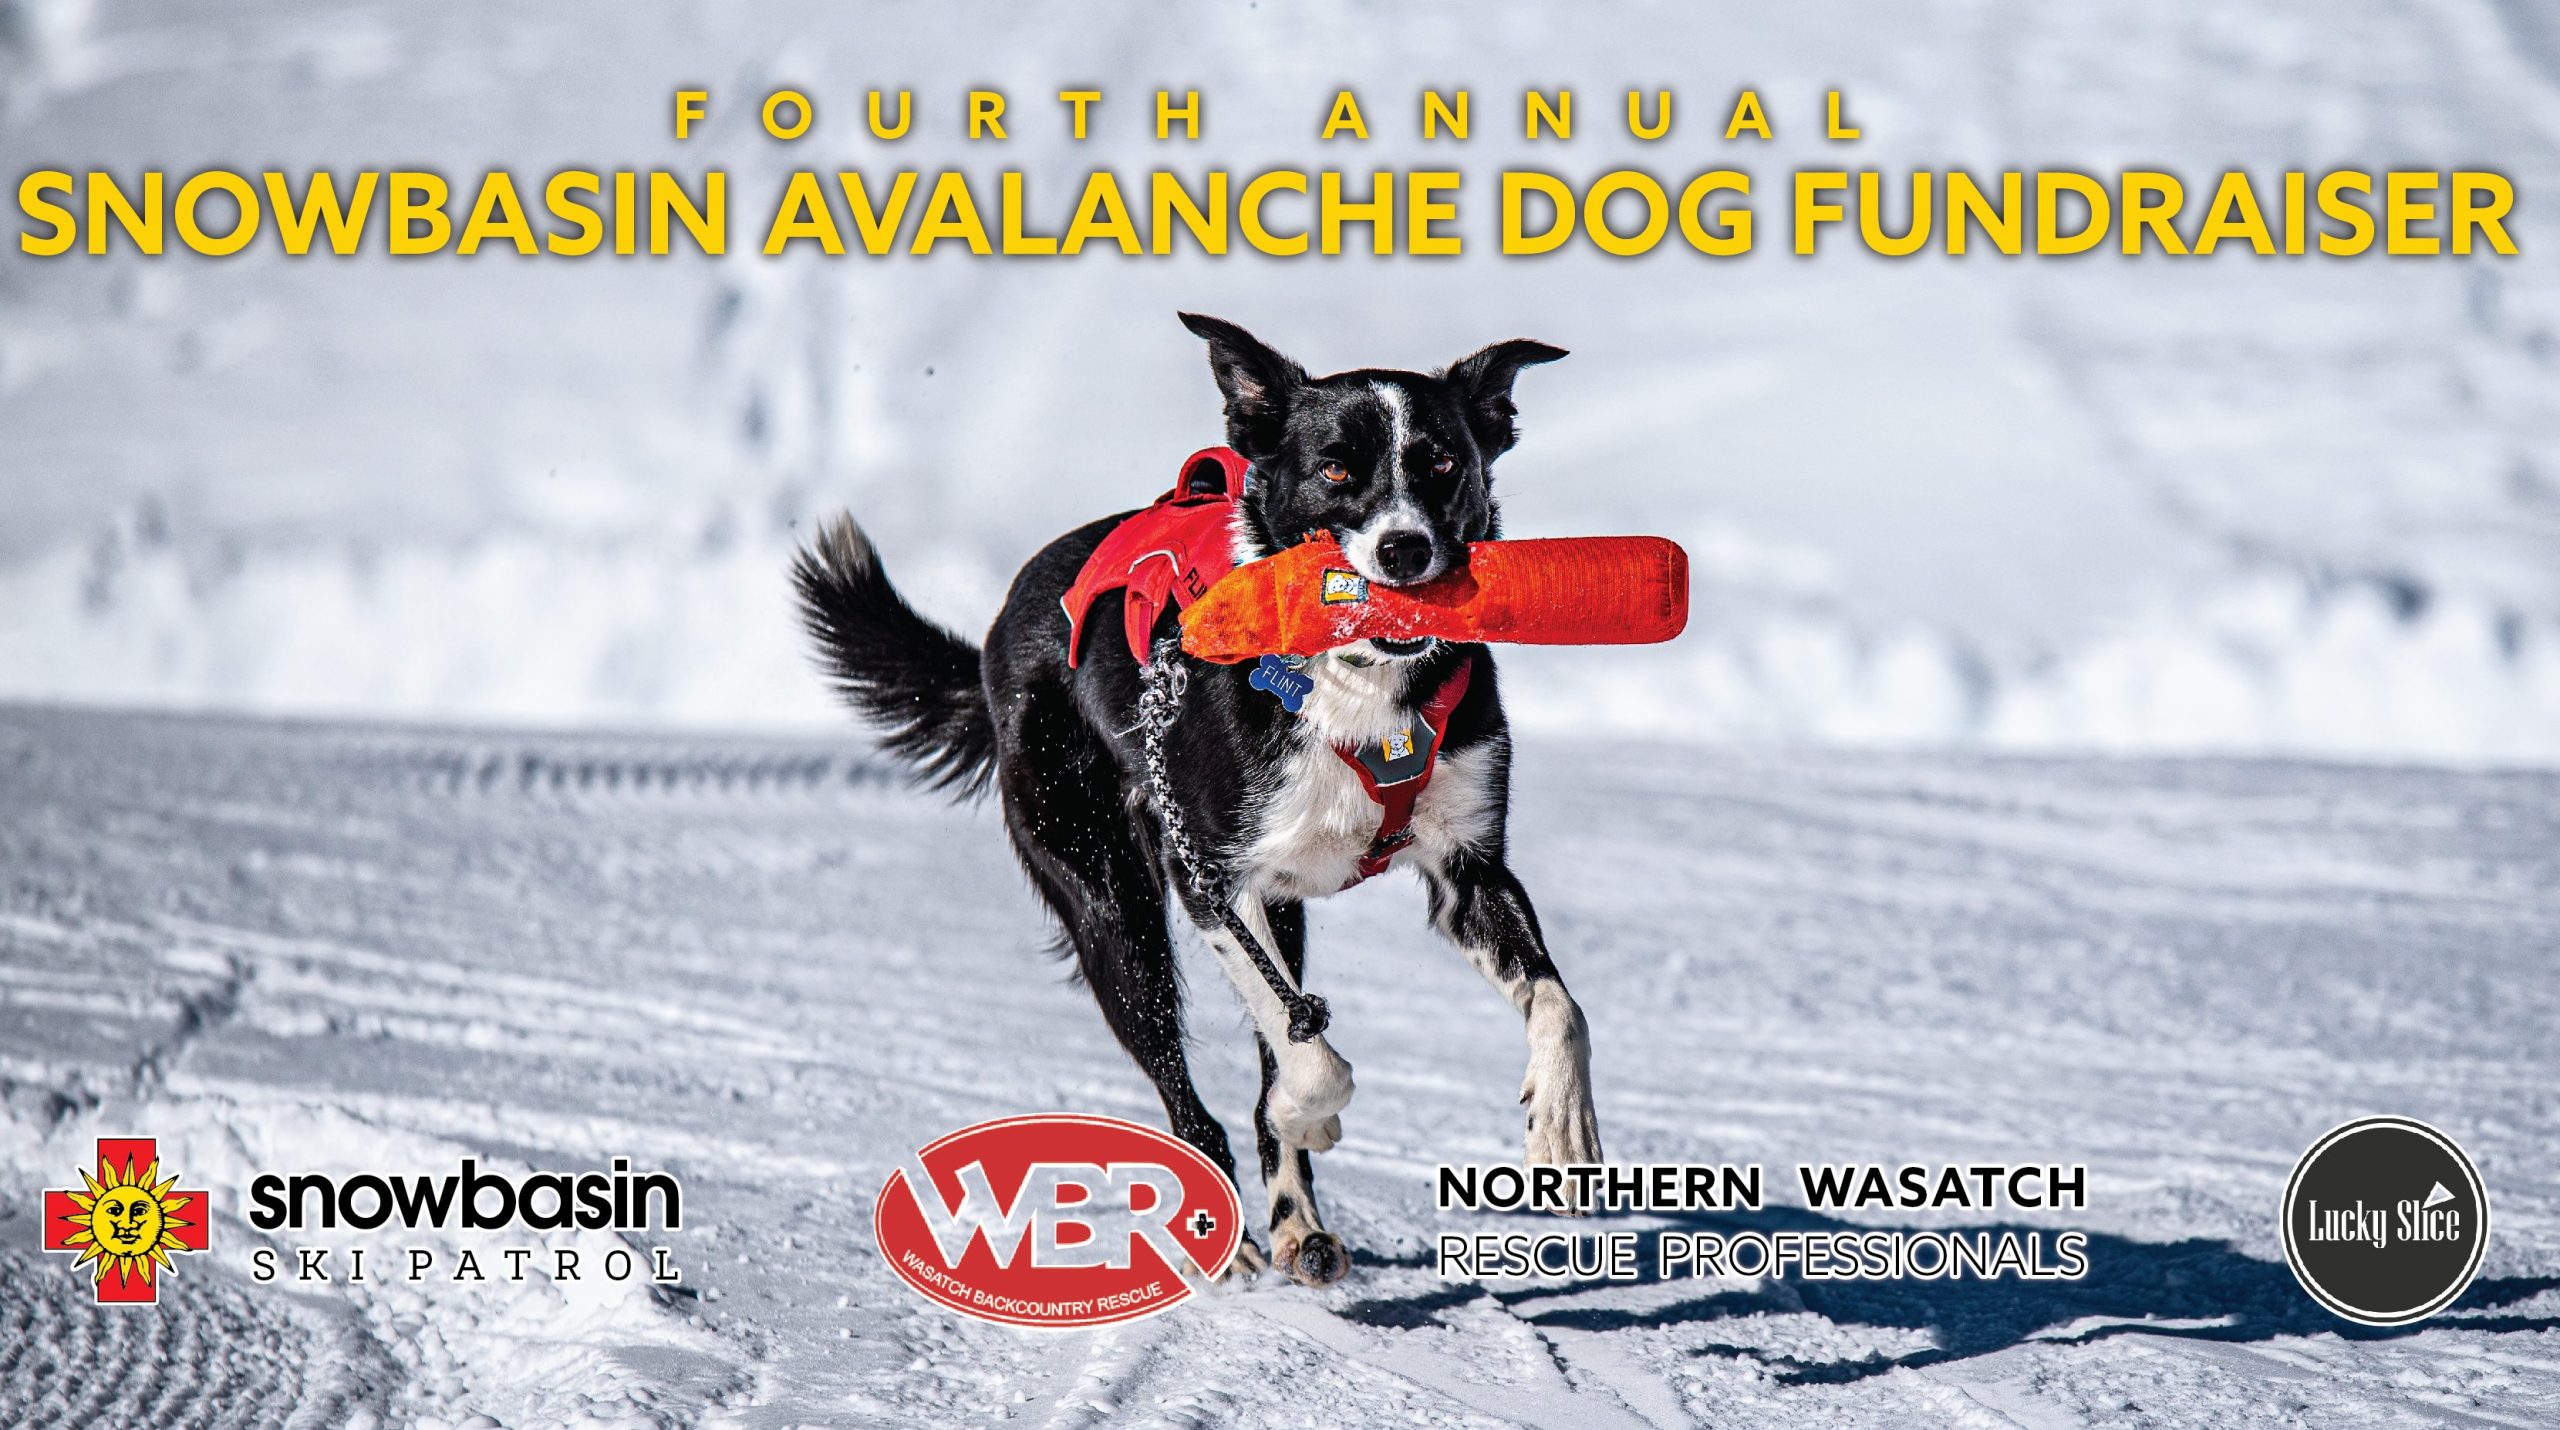 Snowbasin Resort Avalanche Dogs Pay Their Own Way at Annual